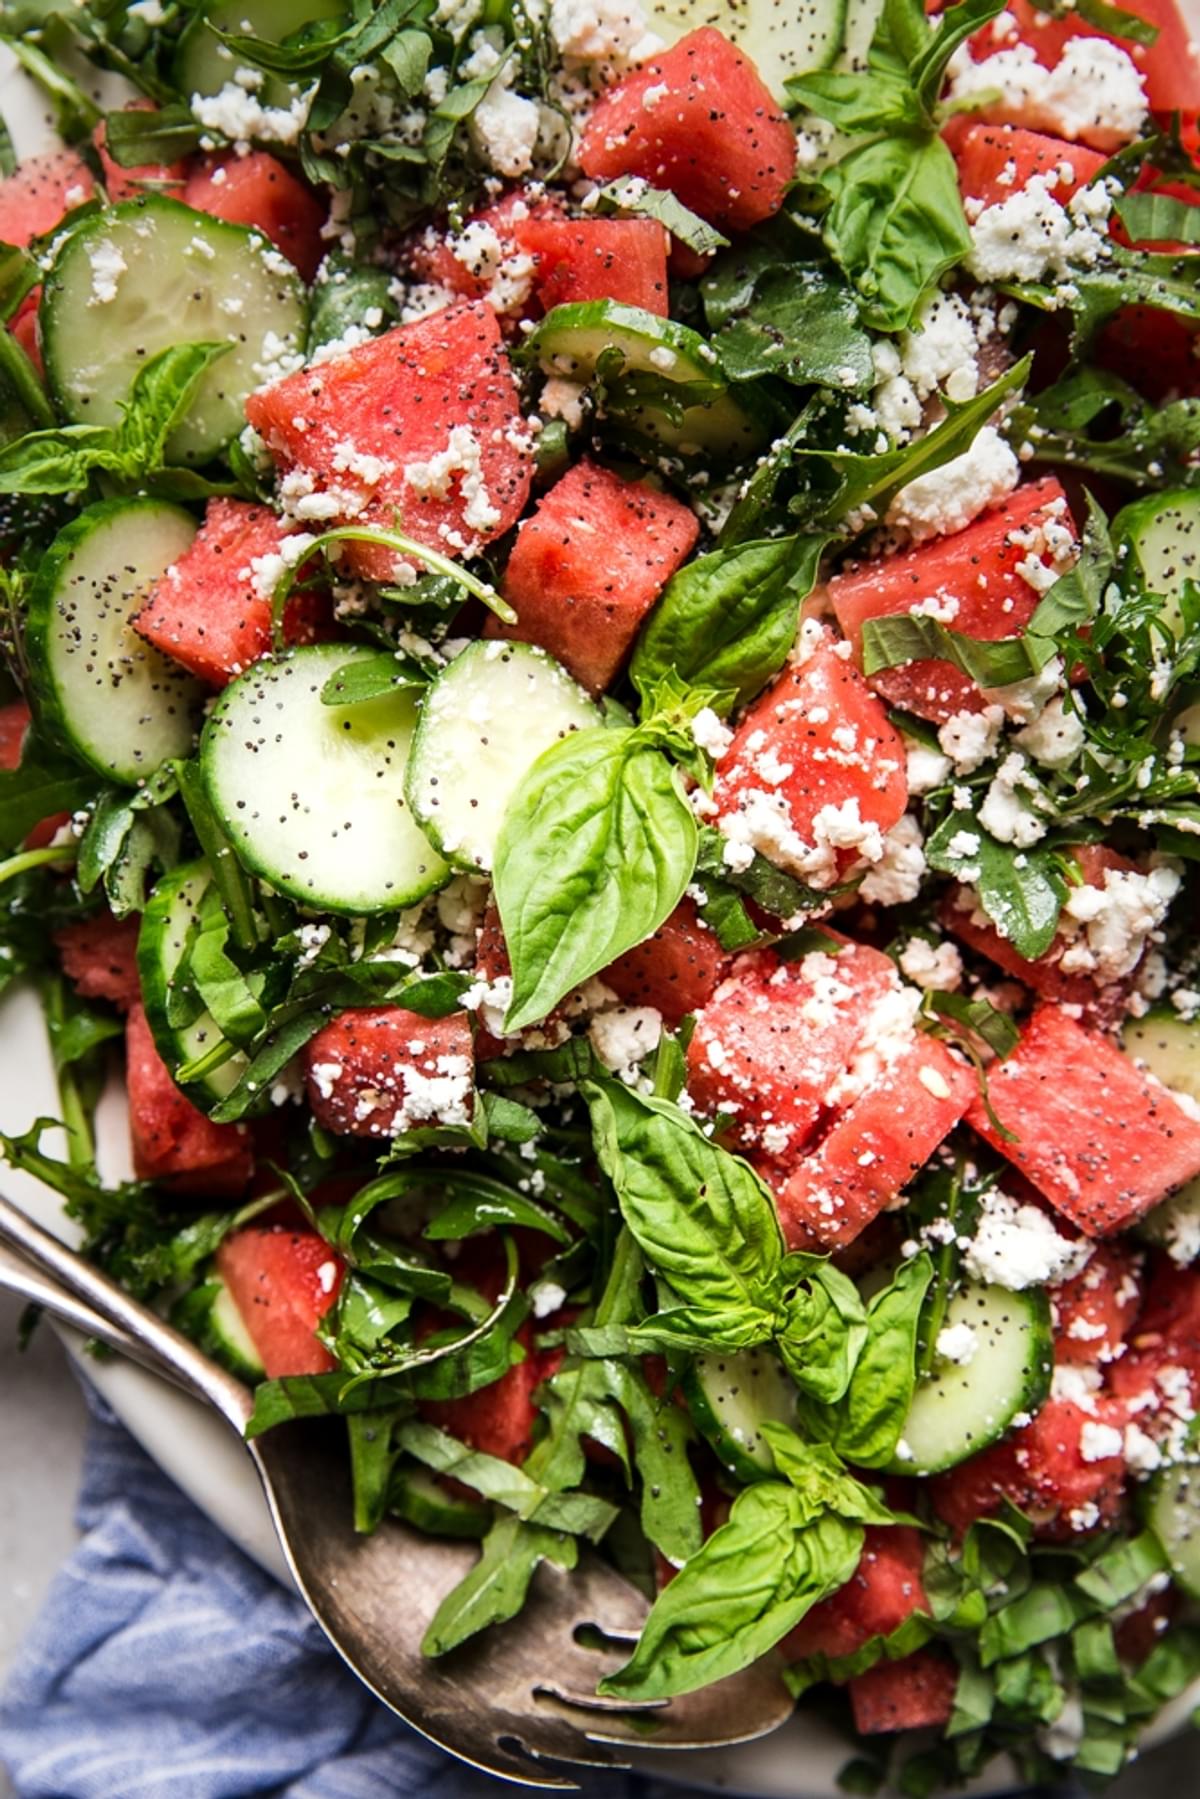 watermelon salad with cucumber, feta, basil and a poppyseed dressing on a plater